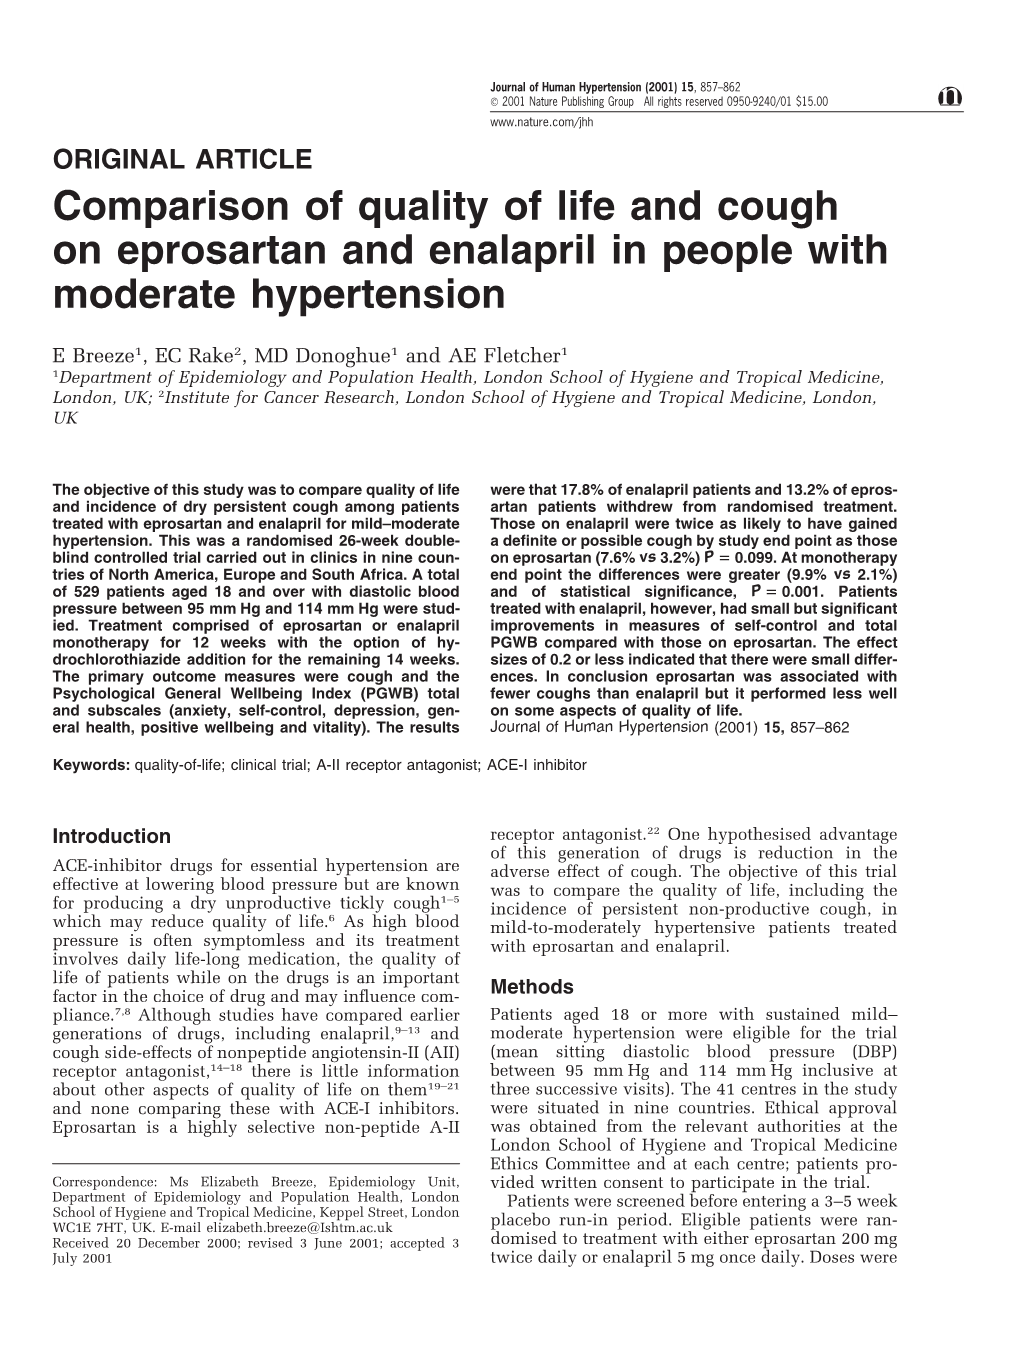 Comparison of Quality of Life and Cough on Eprosartan and Enalapril in People with Moderate Hypertension